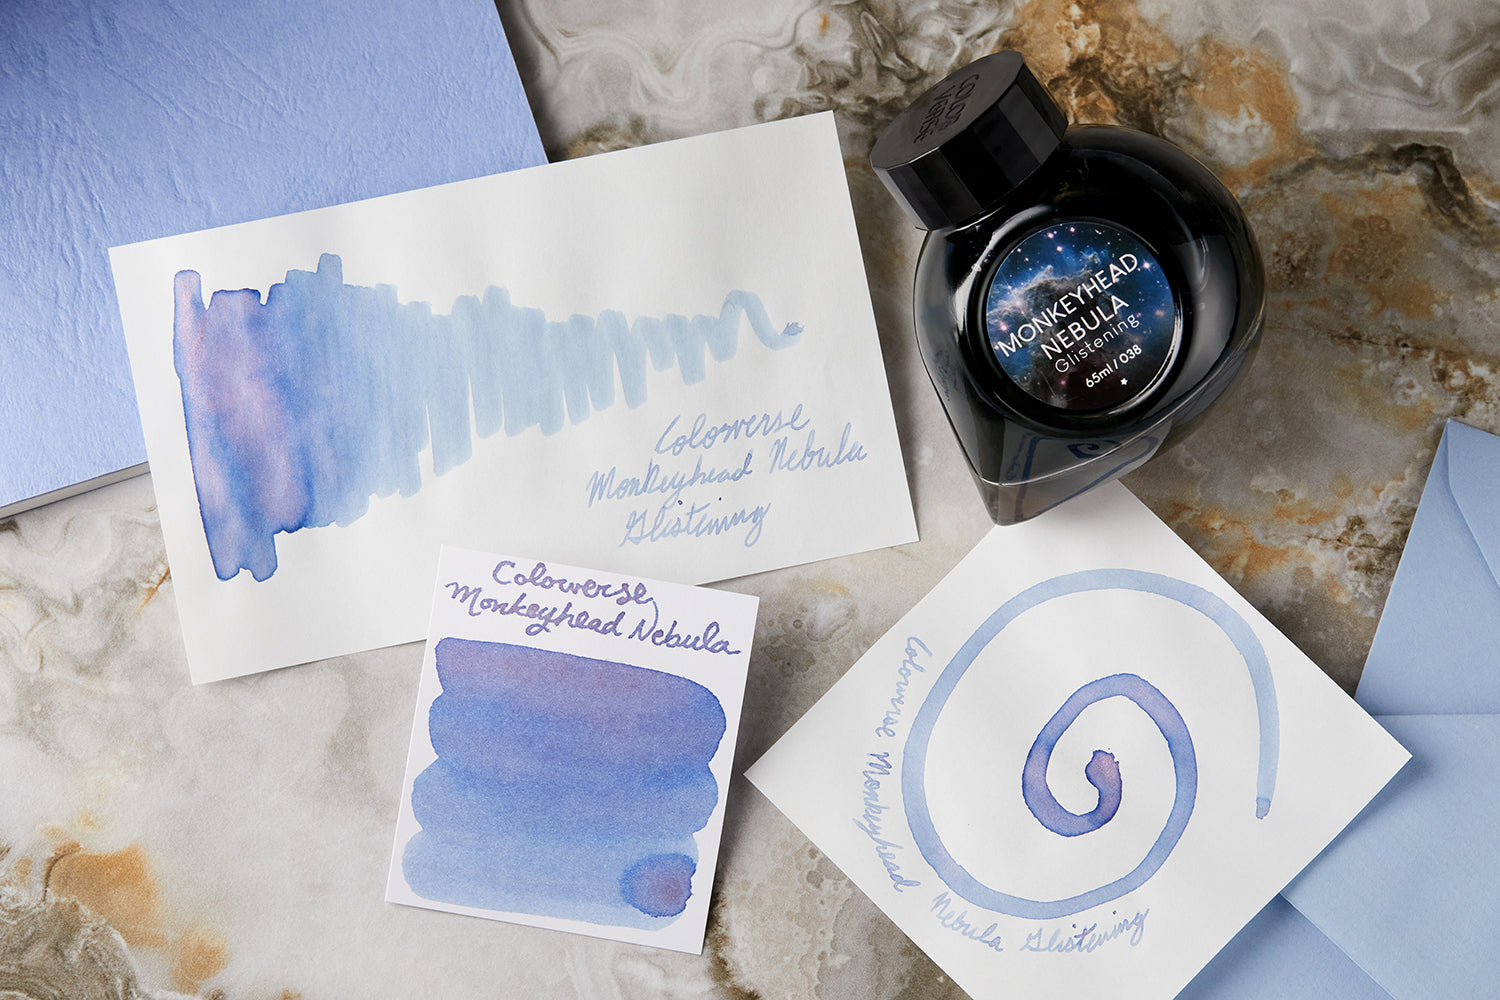 Colorverse Monkeyhead Nebula Glistening fountain pen ink bottle, writing sample, swab and swatch on white background with purple envelopes